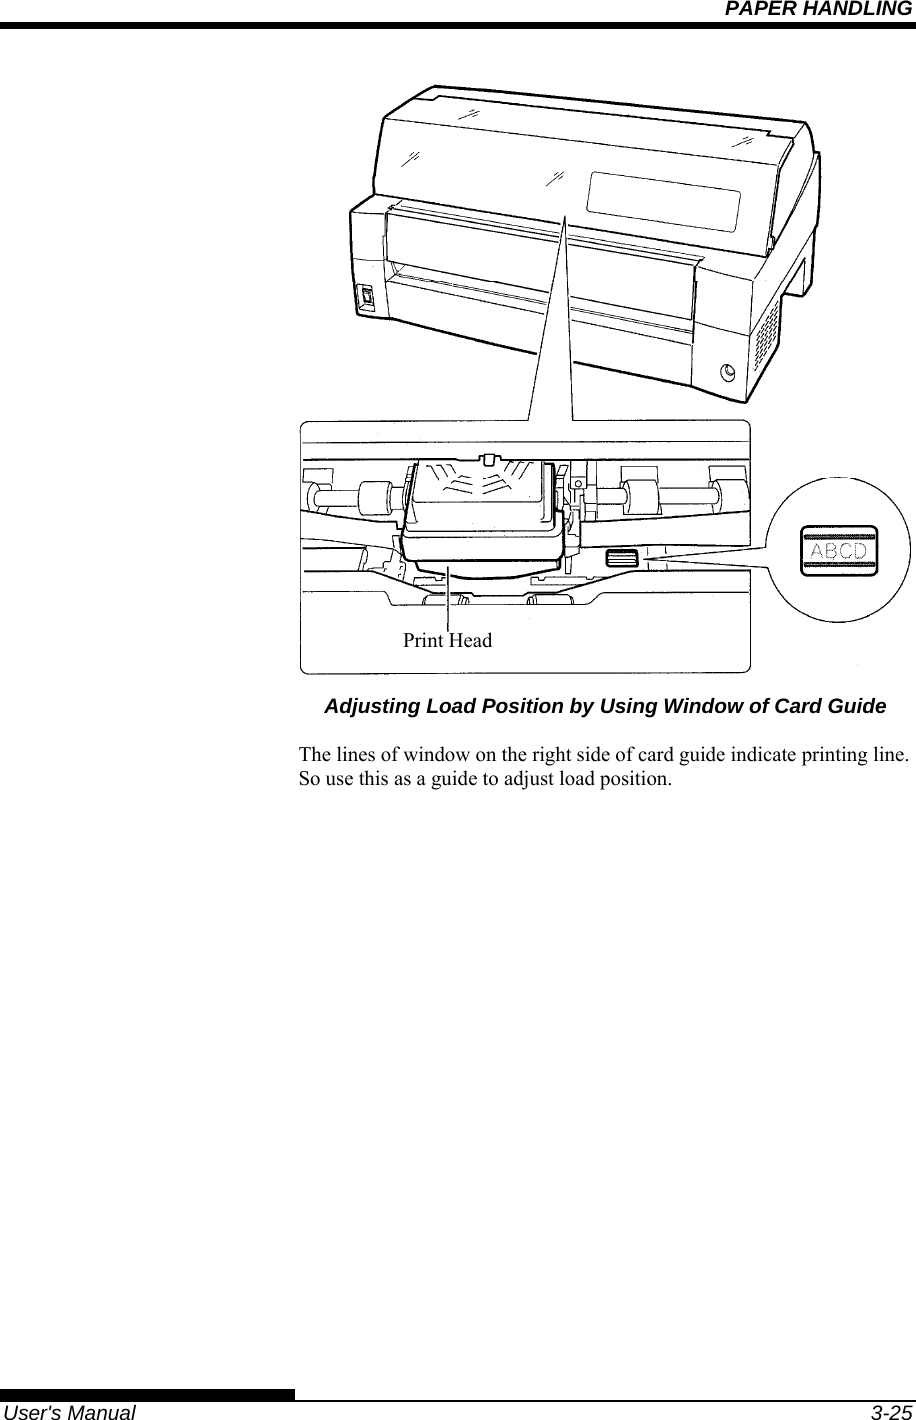 PAPER HANDLING   User&apos;s Manual  3-25  Adjusting Load Position by Using Window of Card Guide  The lines of window on the right side of card guide indicate printing line. So use this as a guide to adjust load position.    Print Head 